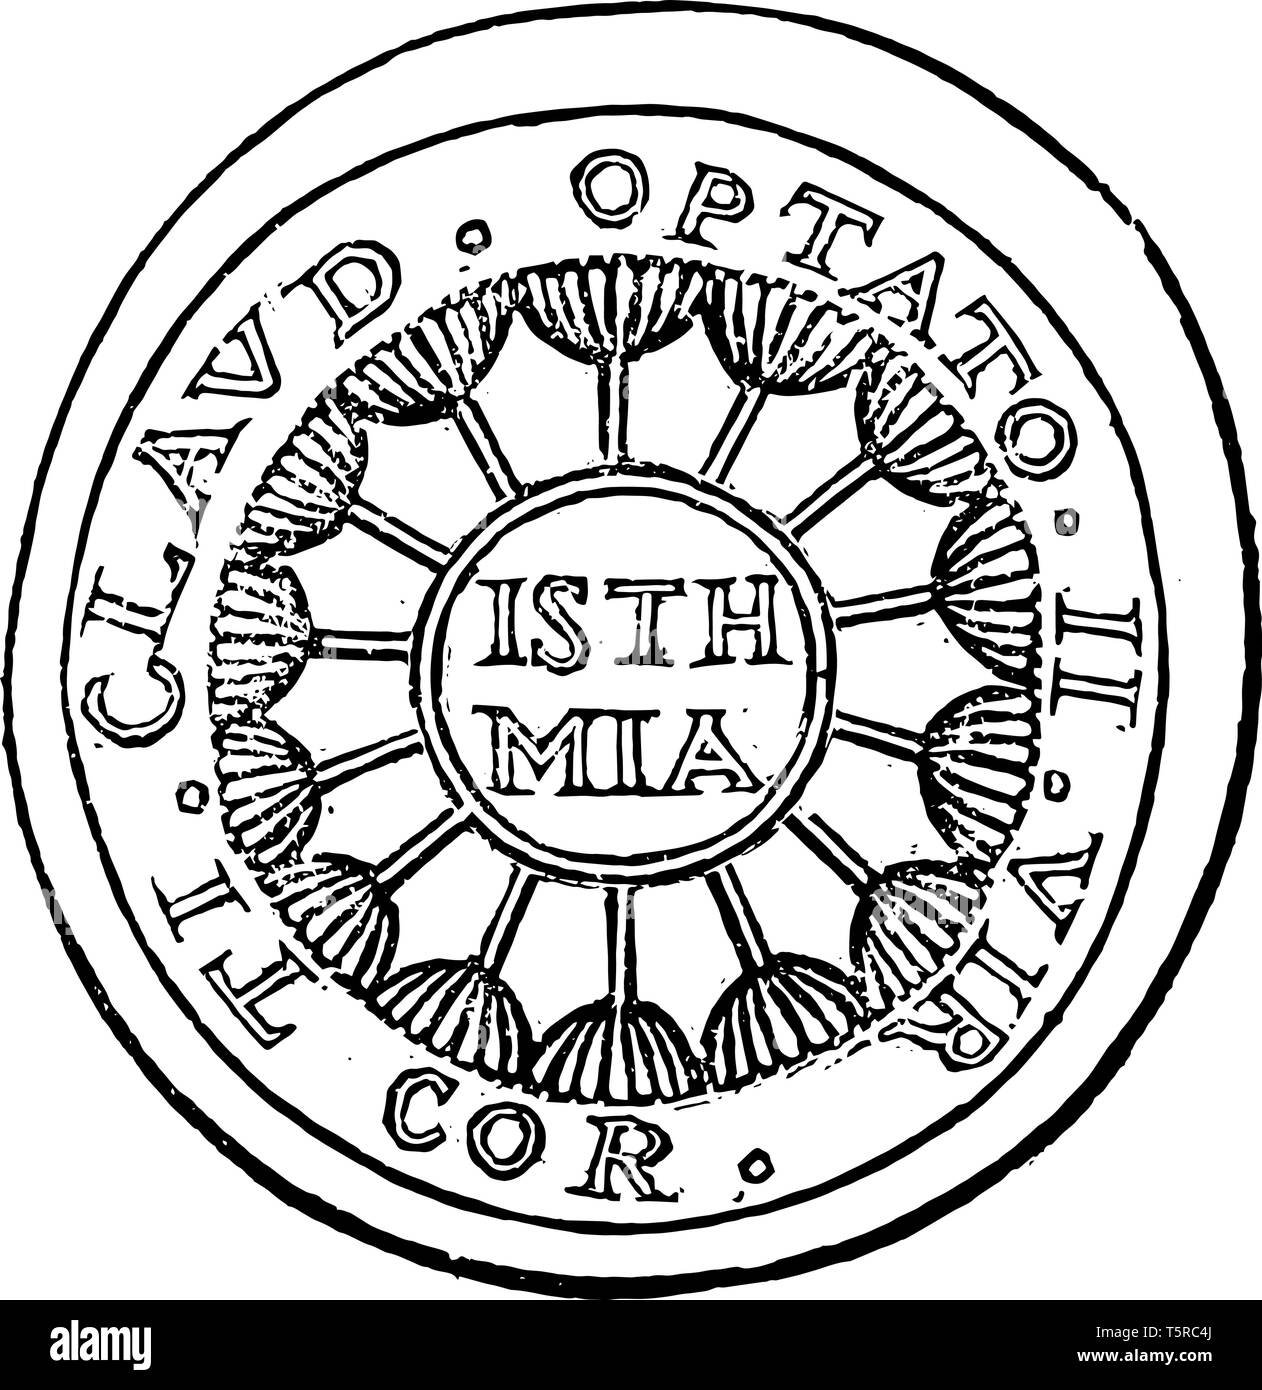 This image shows the medal made by using a pattern such as the concentric circle. The first and third circles are filled with the text and are filled  Stock Vector